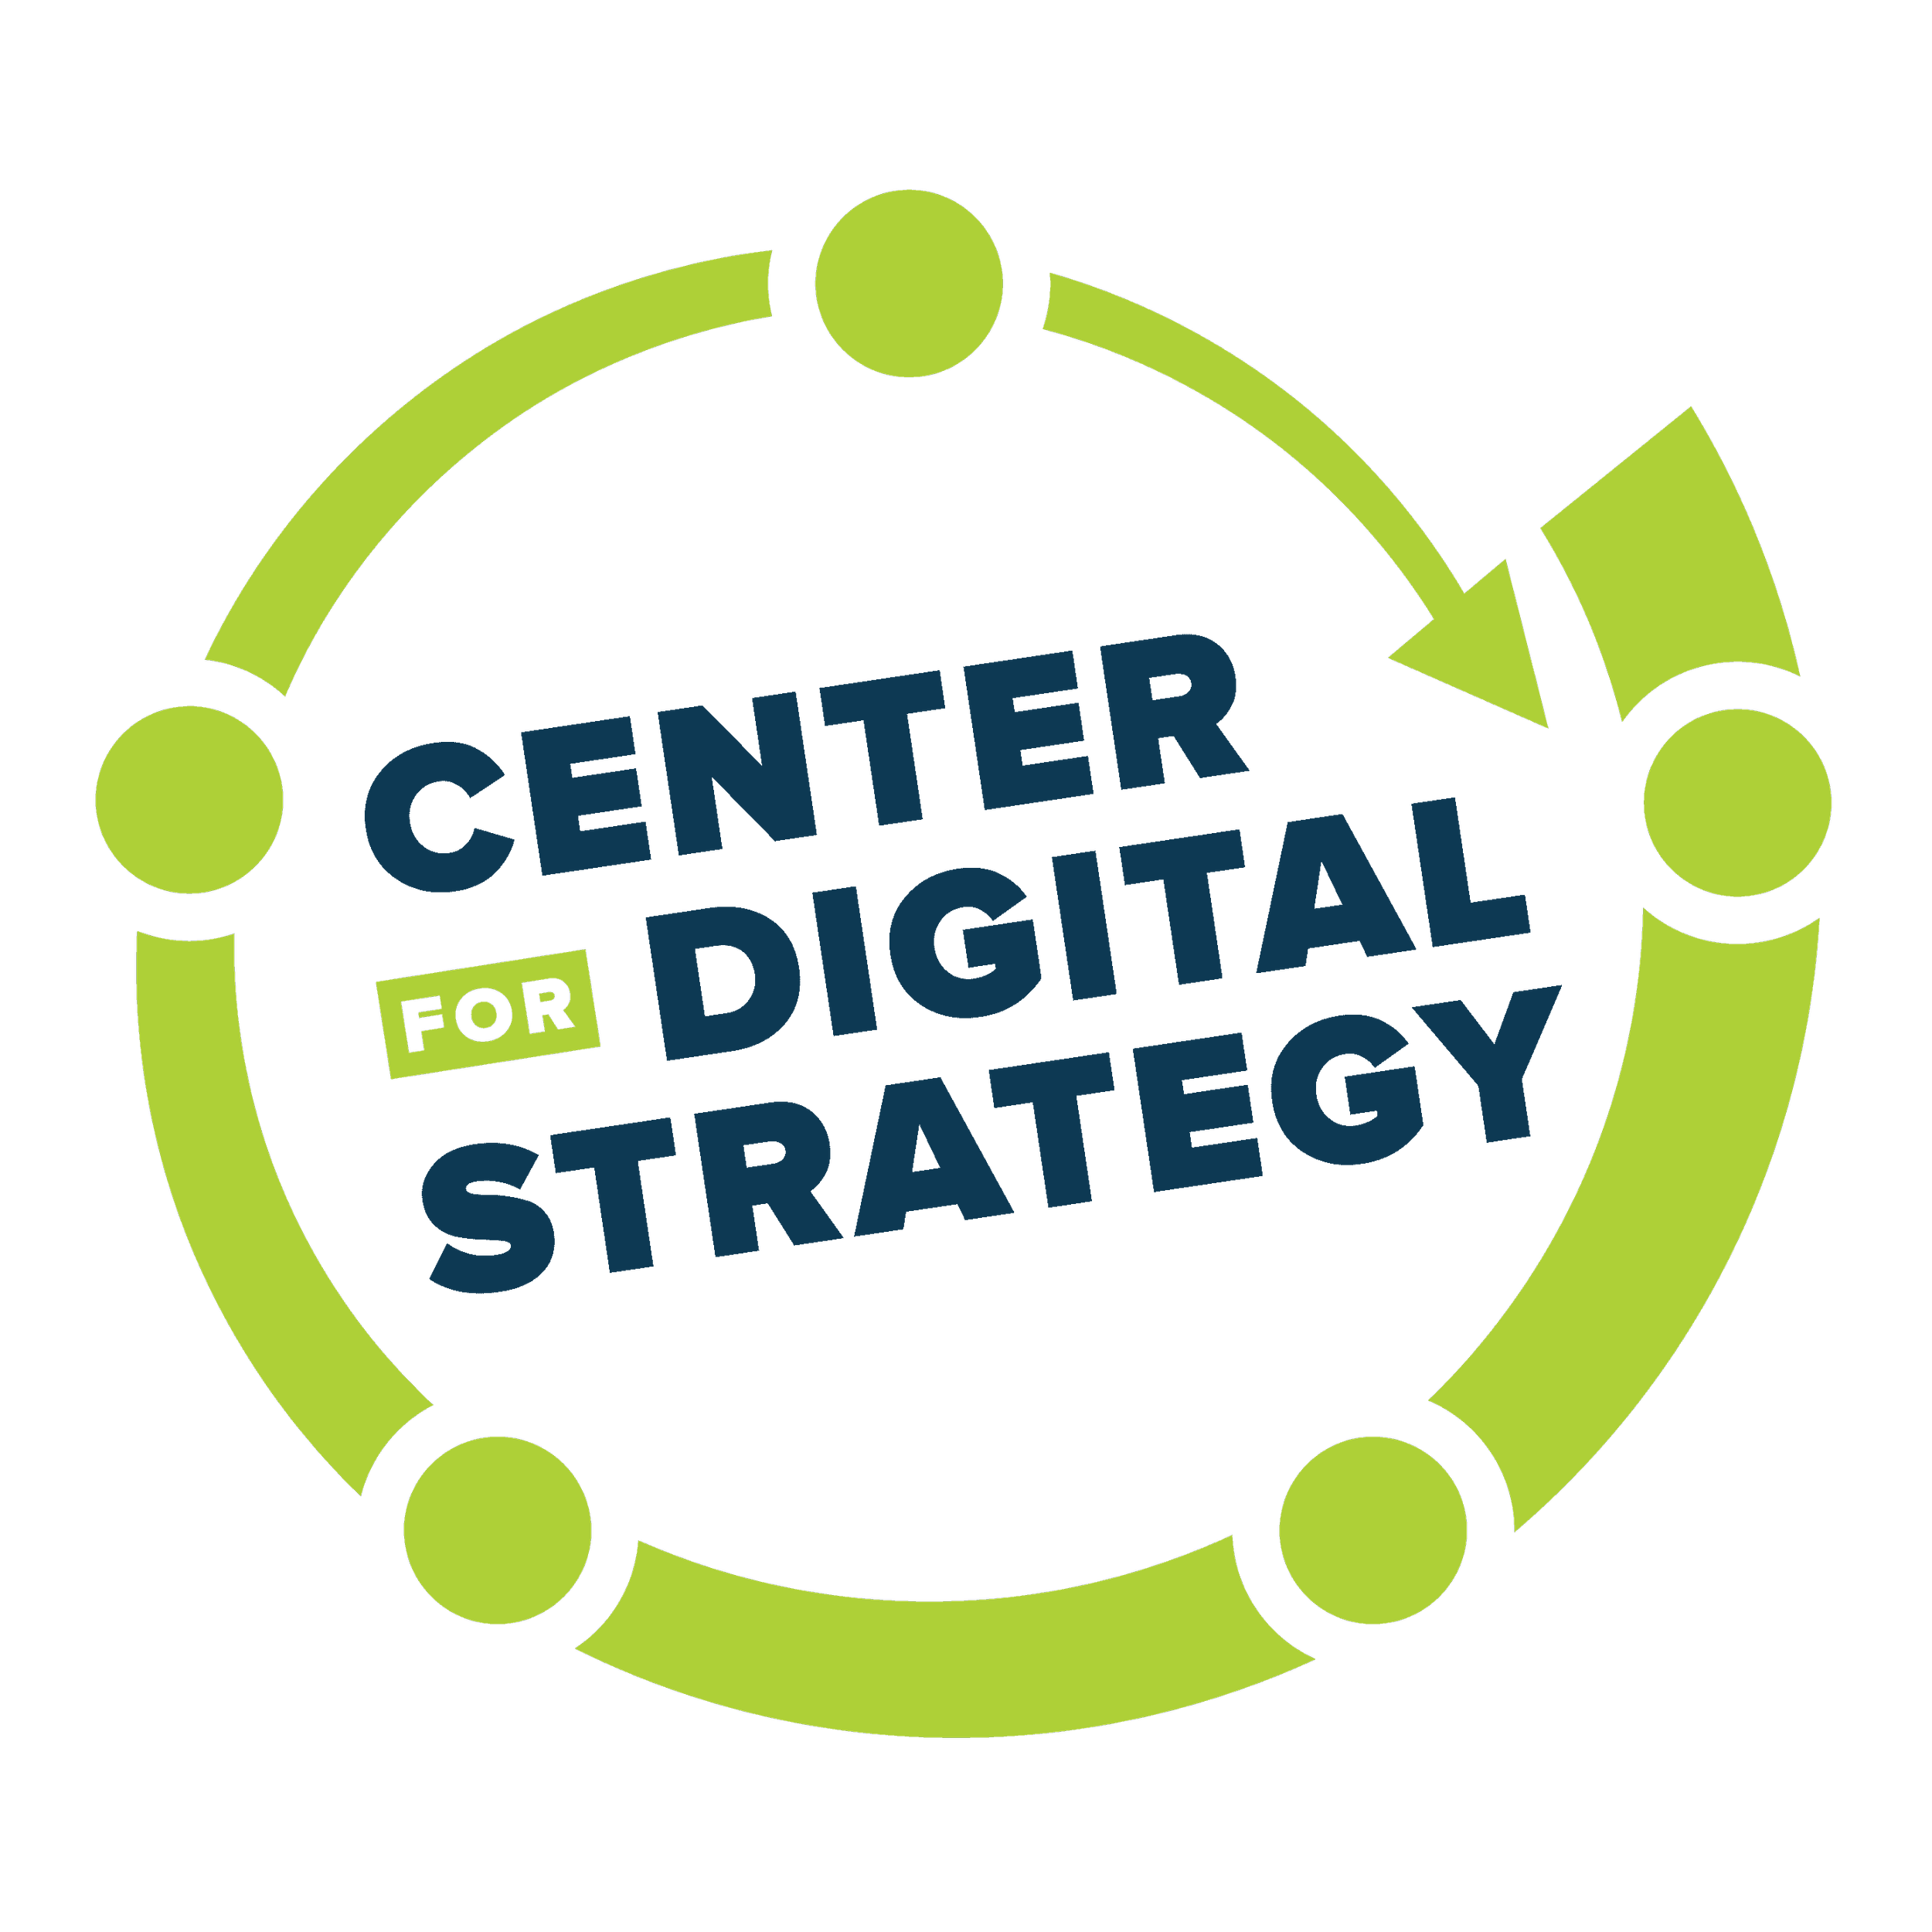 Digital-Strategy-Center-for-Digital-Strategy-Logo-green-box-blue-text-transparent-back@300x.png